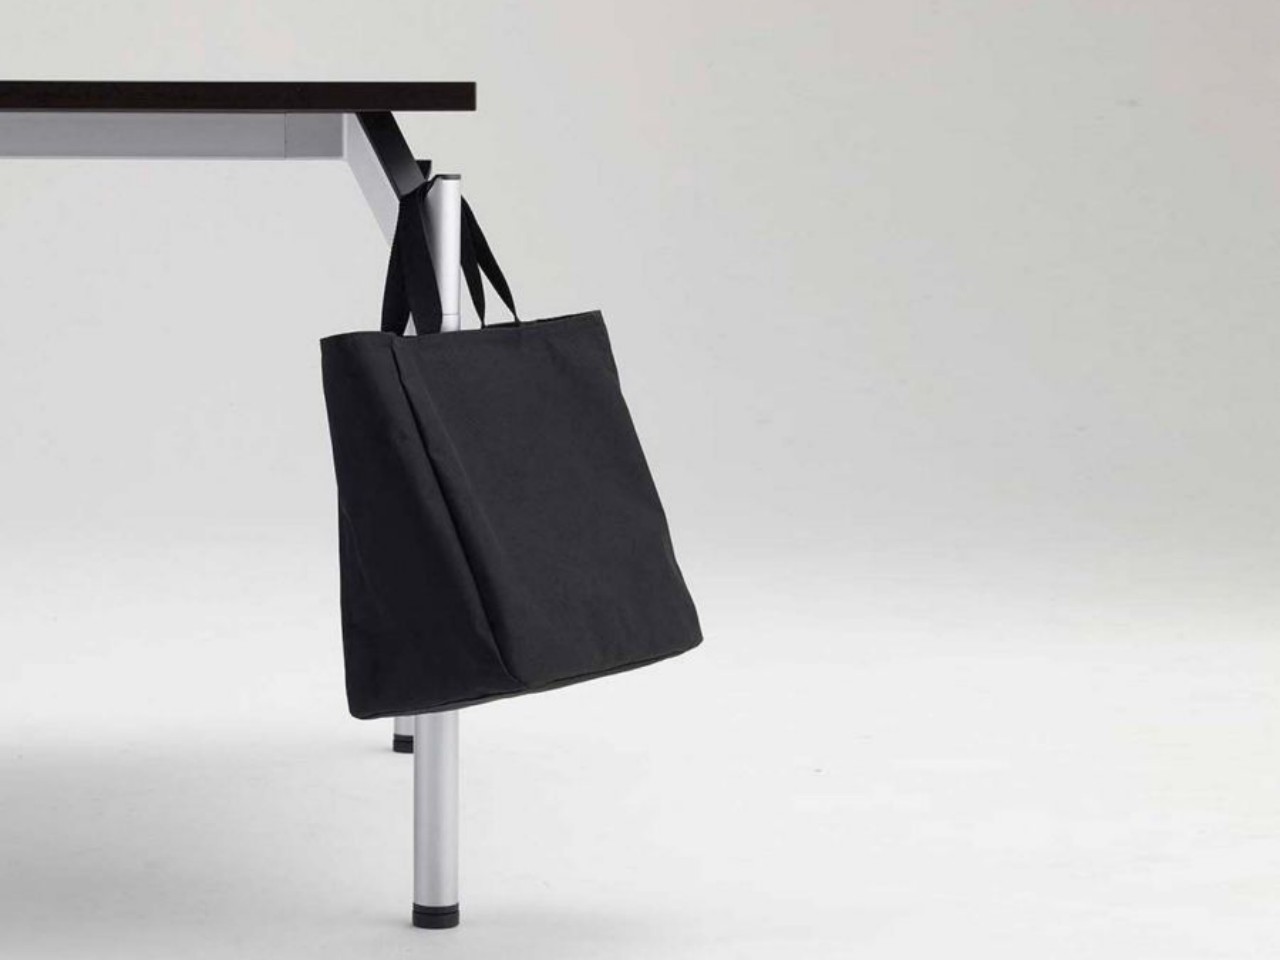 #This simple table has an equally simple solution for hanging your bags